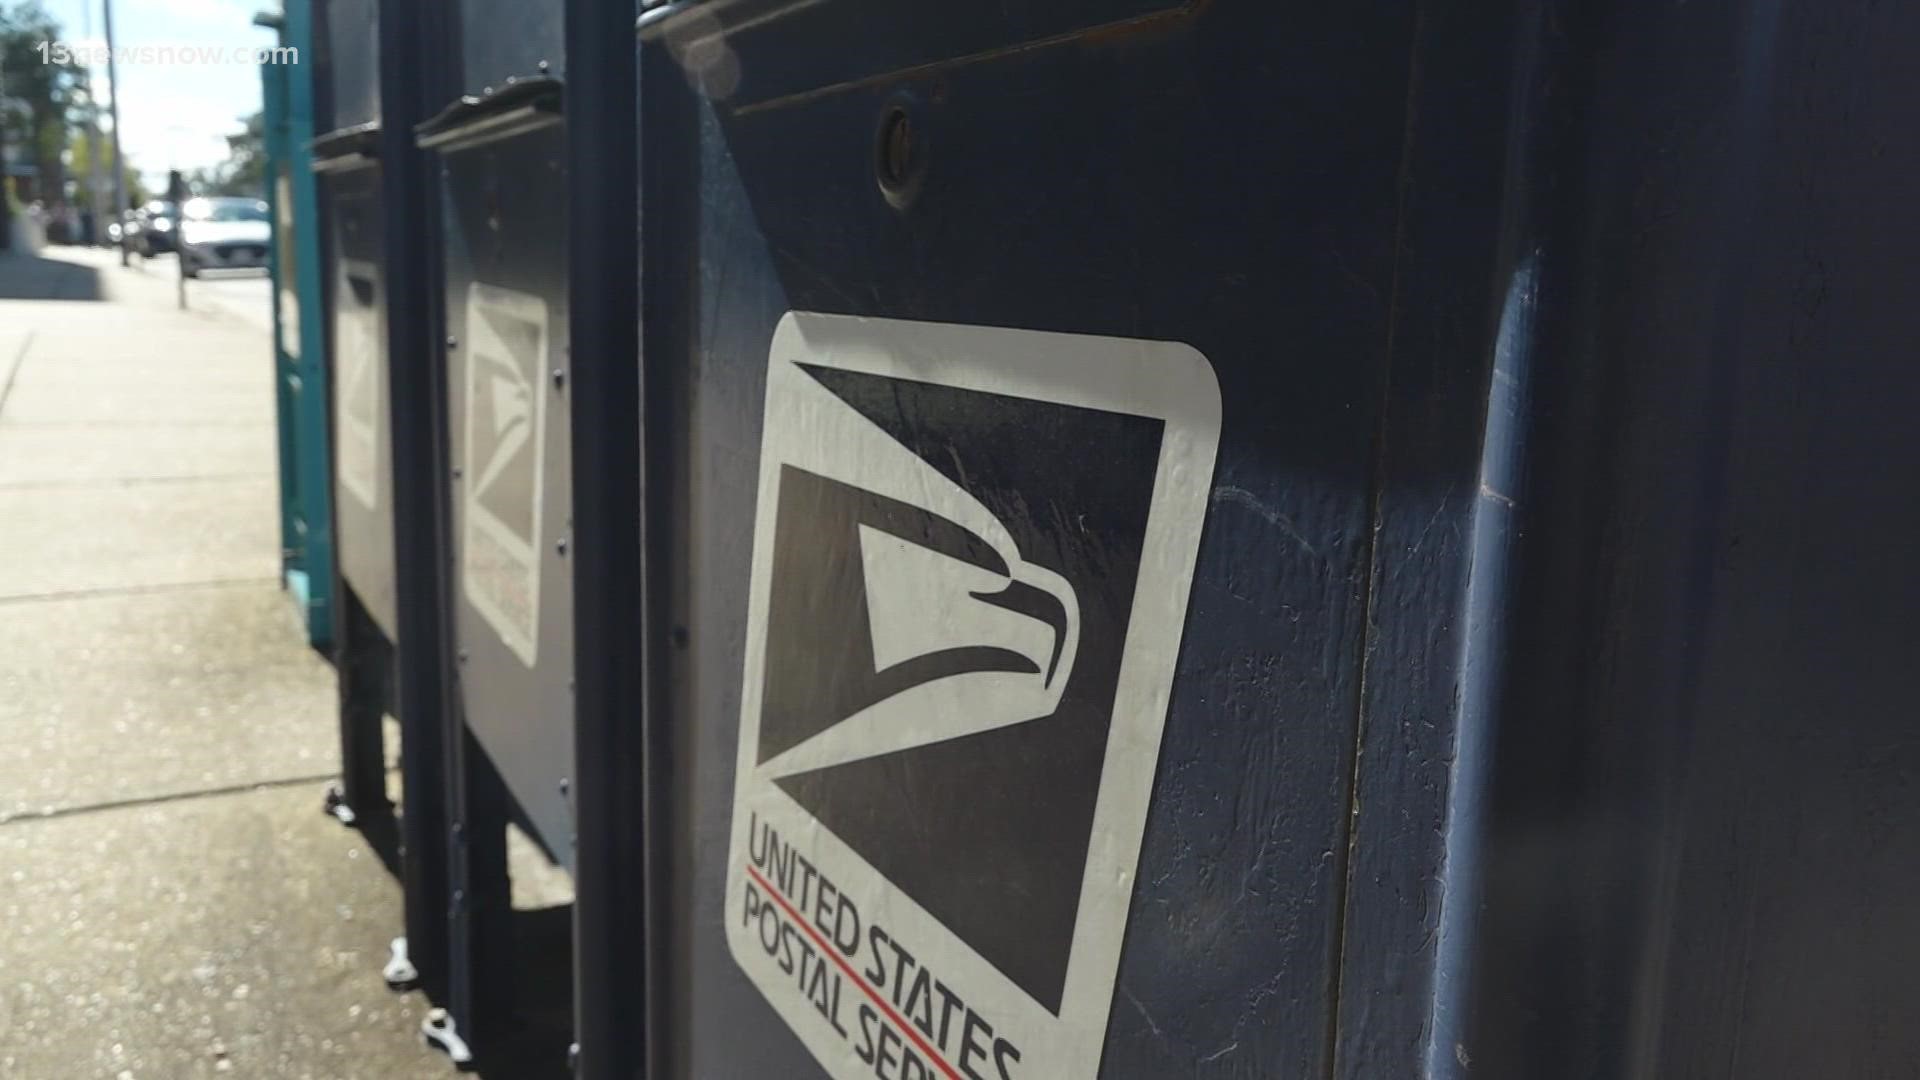 Some Democrats are suing the postal service, claiming thousands of ballots are at post officers unopened.